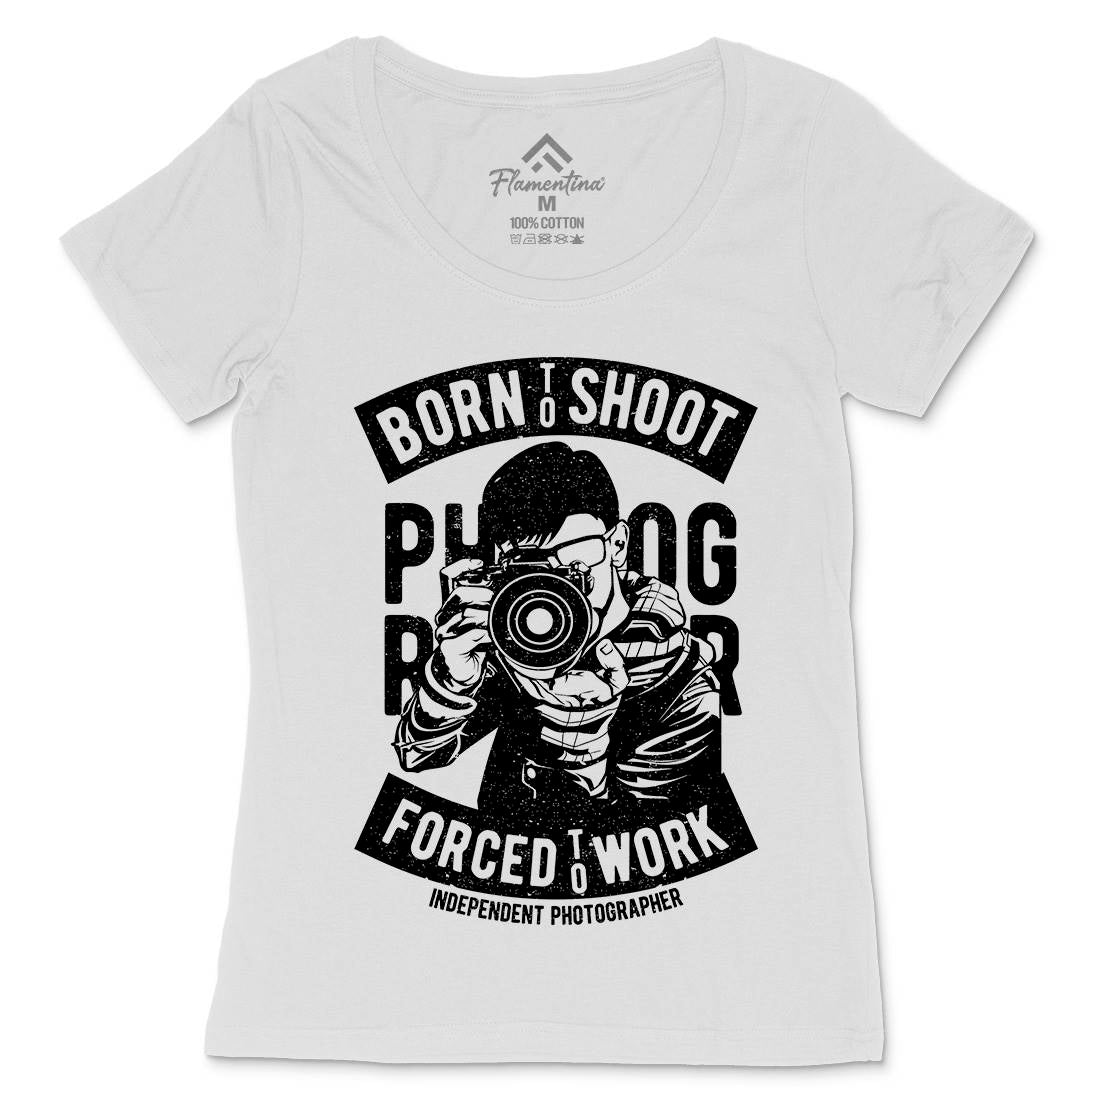 Born To Shoot Womens Scoop Neck T-Shirt Media A623